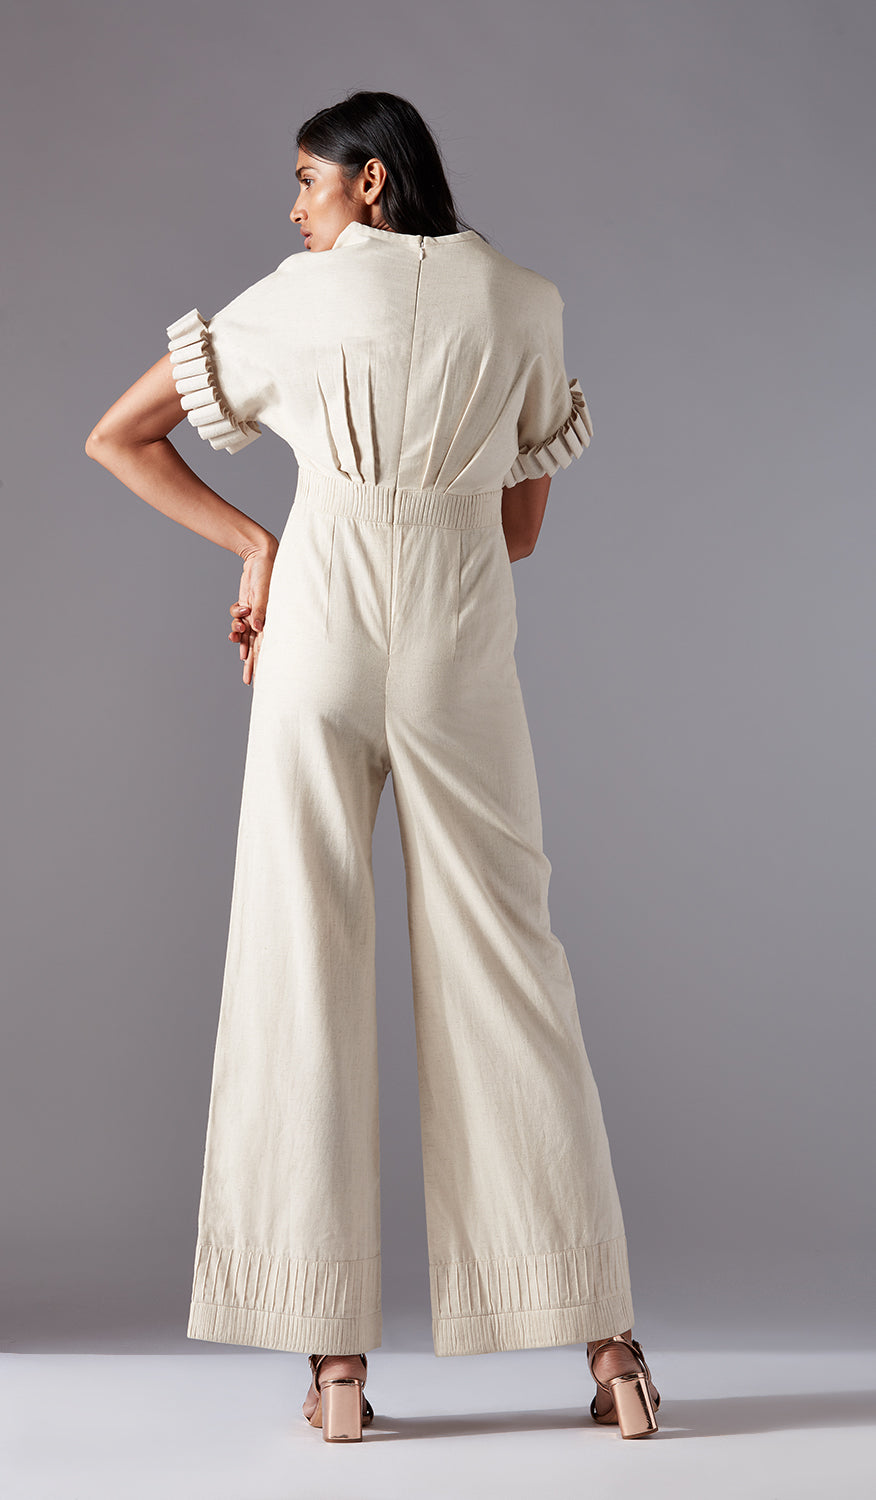 JUMP SUIT WITH DETAILS ON SLEEVES